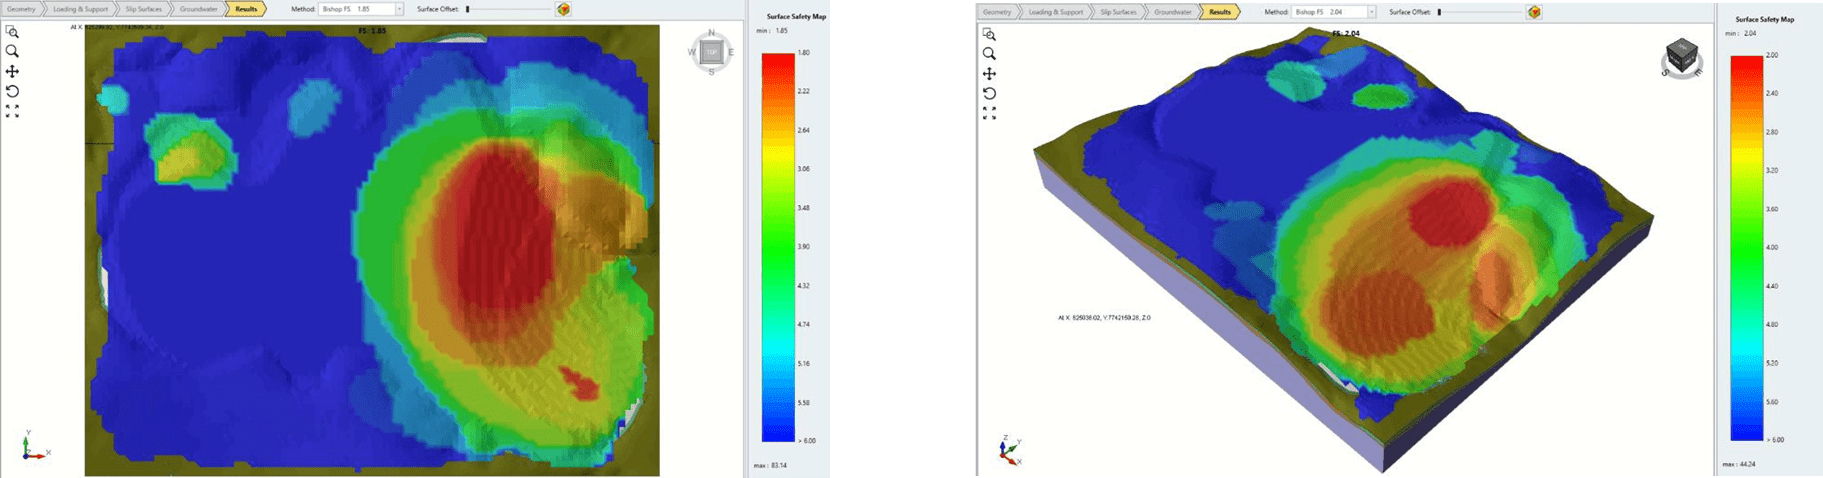 Figure 4: Safety Map view of the results obtained from 3D stability analysis at Residual (left) and Peak material strengths (right).